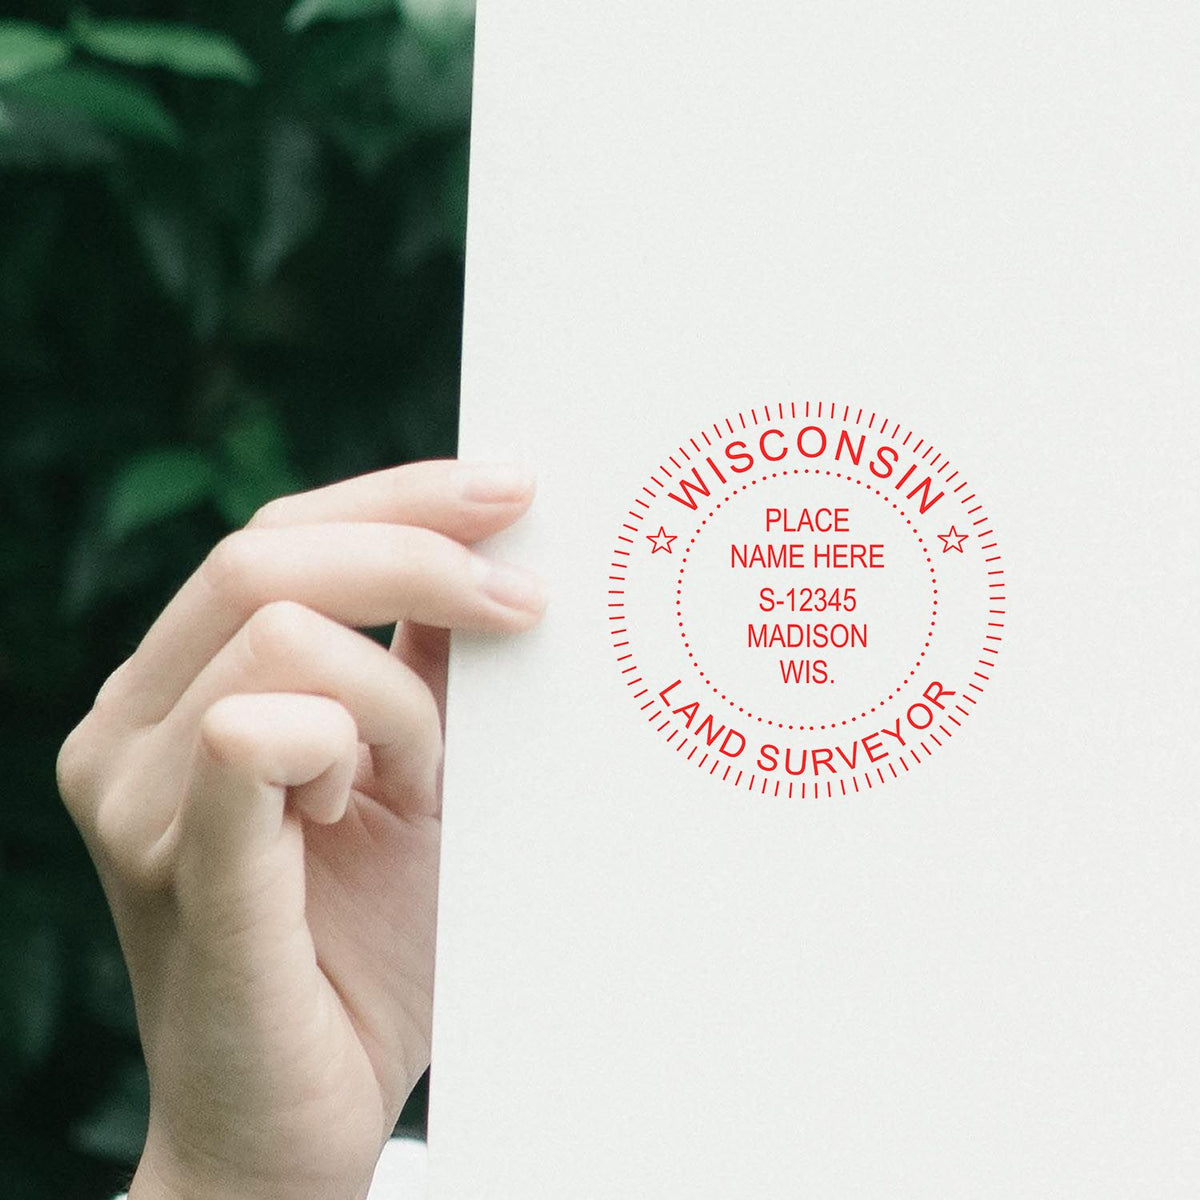 The Slim Pre-Inked Wisconsin Land Surveyor Seal Stamp stamp impression comes to life with a crisp, detailed photo on paper - showcasing true professional quality.